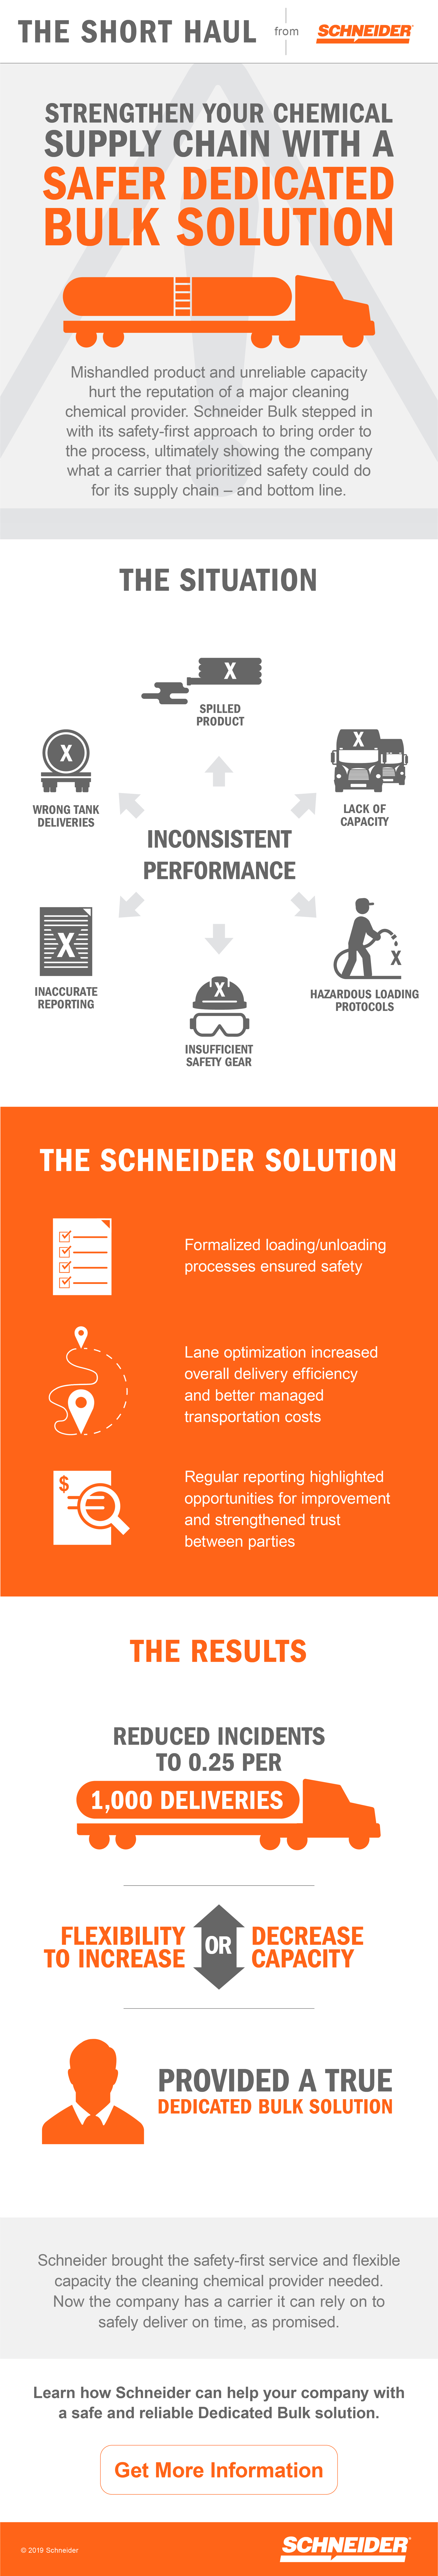 A safety-first dedicated Bulk solution for chemical supply chain for a safer transportation solution